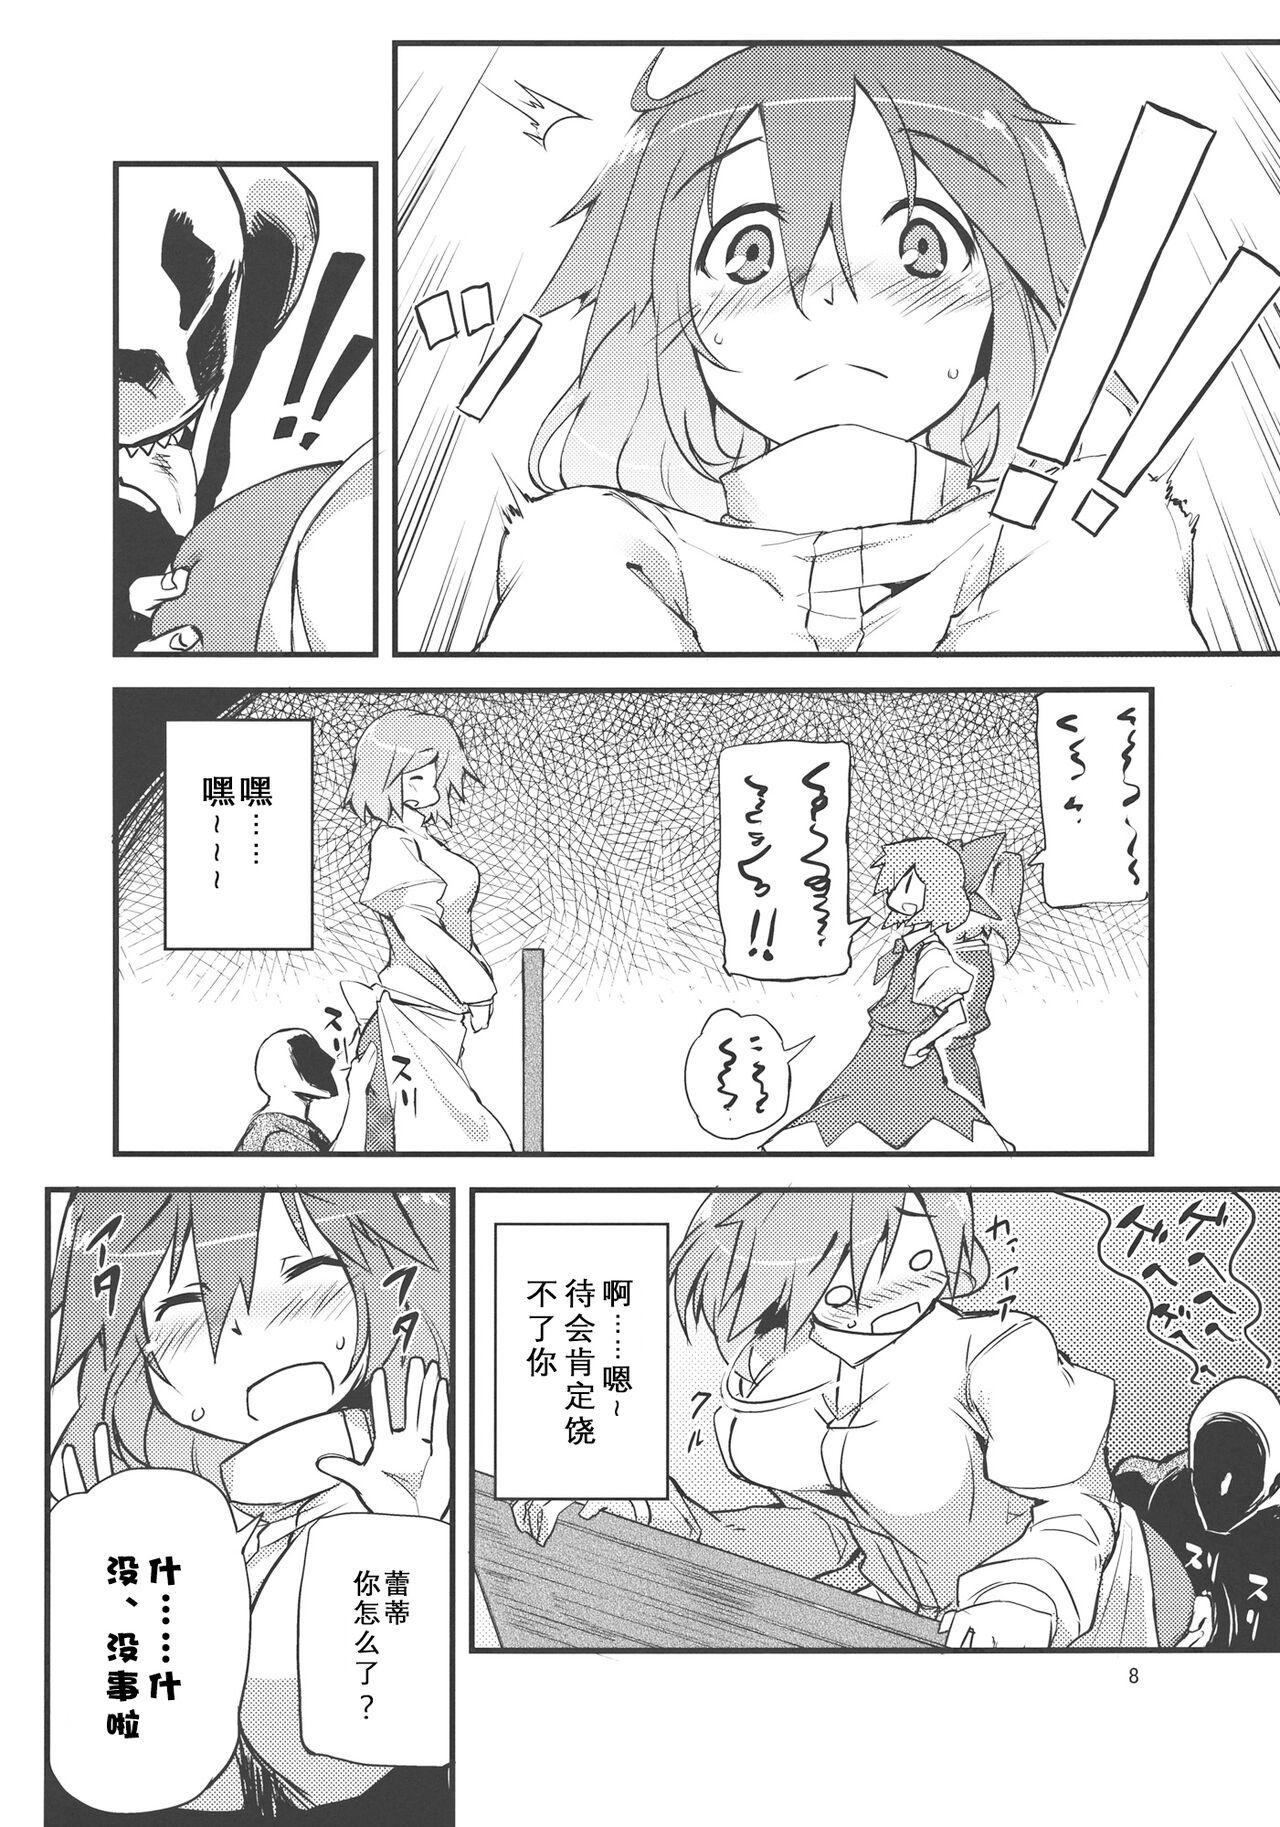 Smooth x Letty | ×蕾蒂 - Touhou project Porn Pussy - Page 8